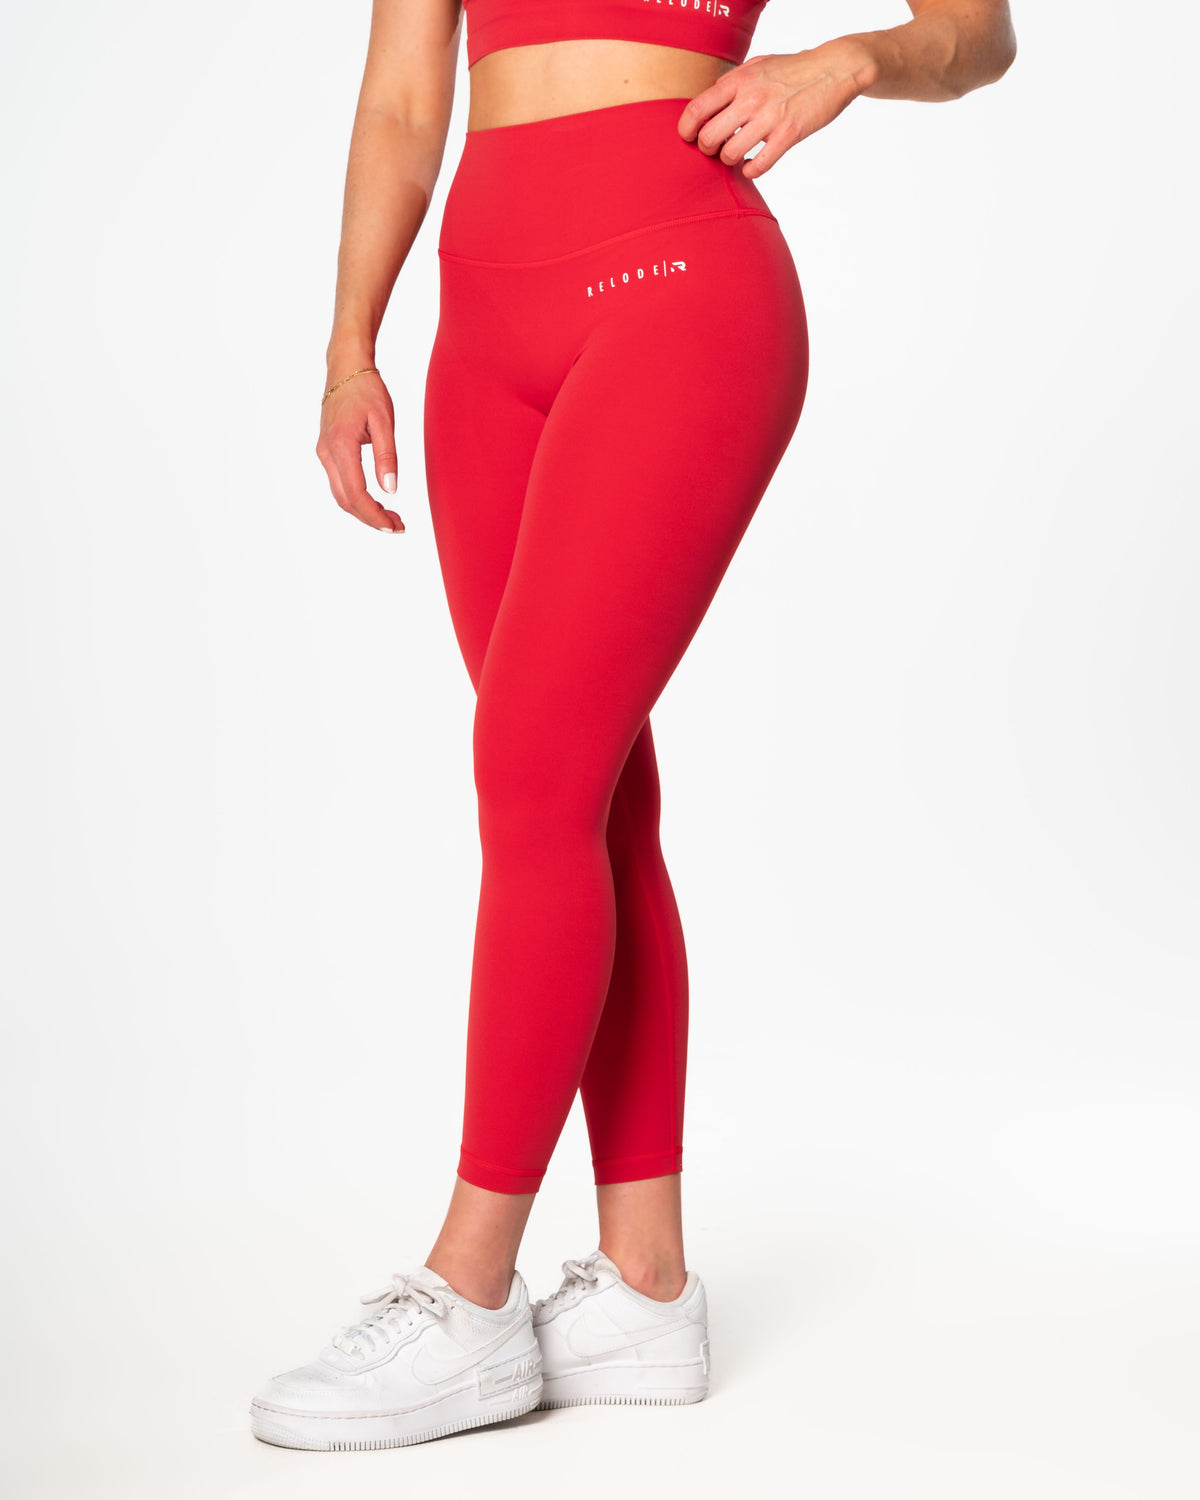 Mercy Tights - Red